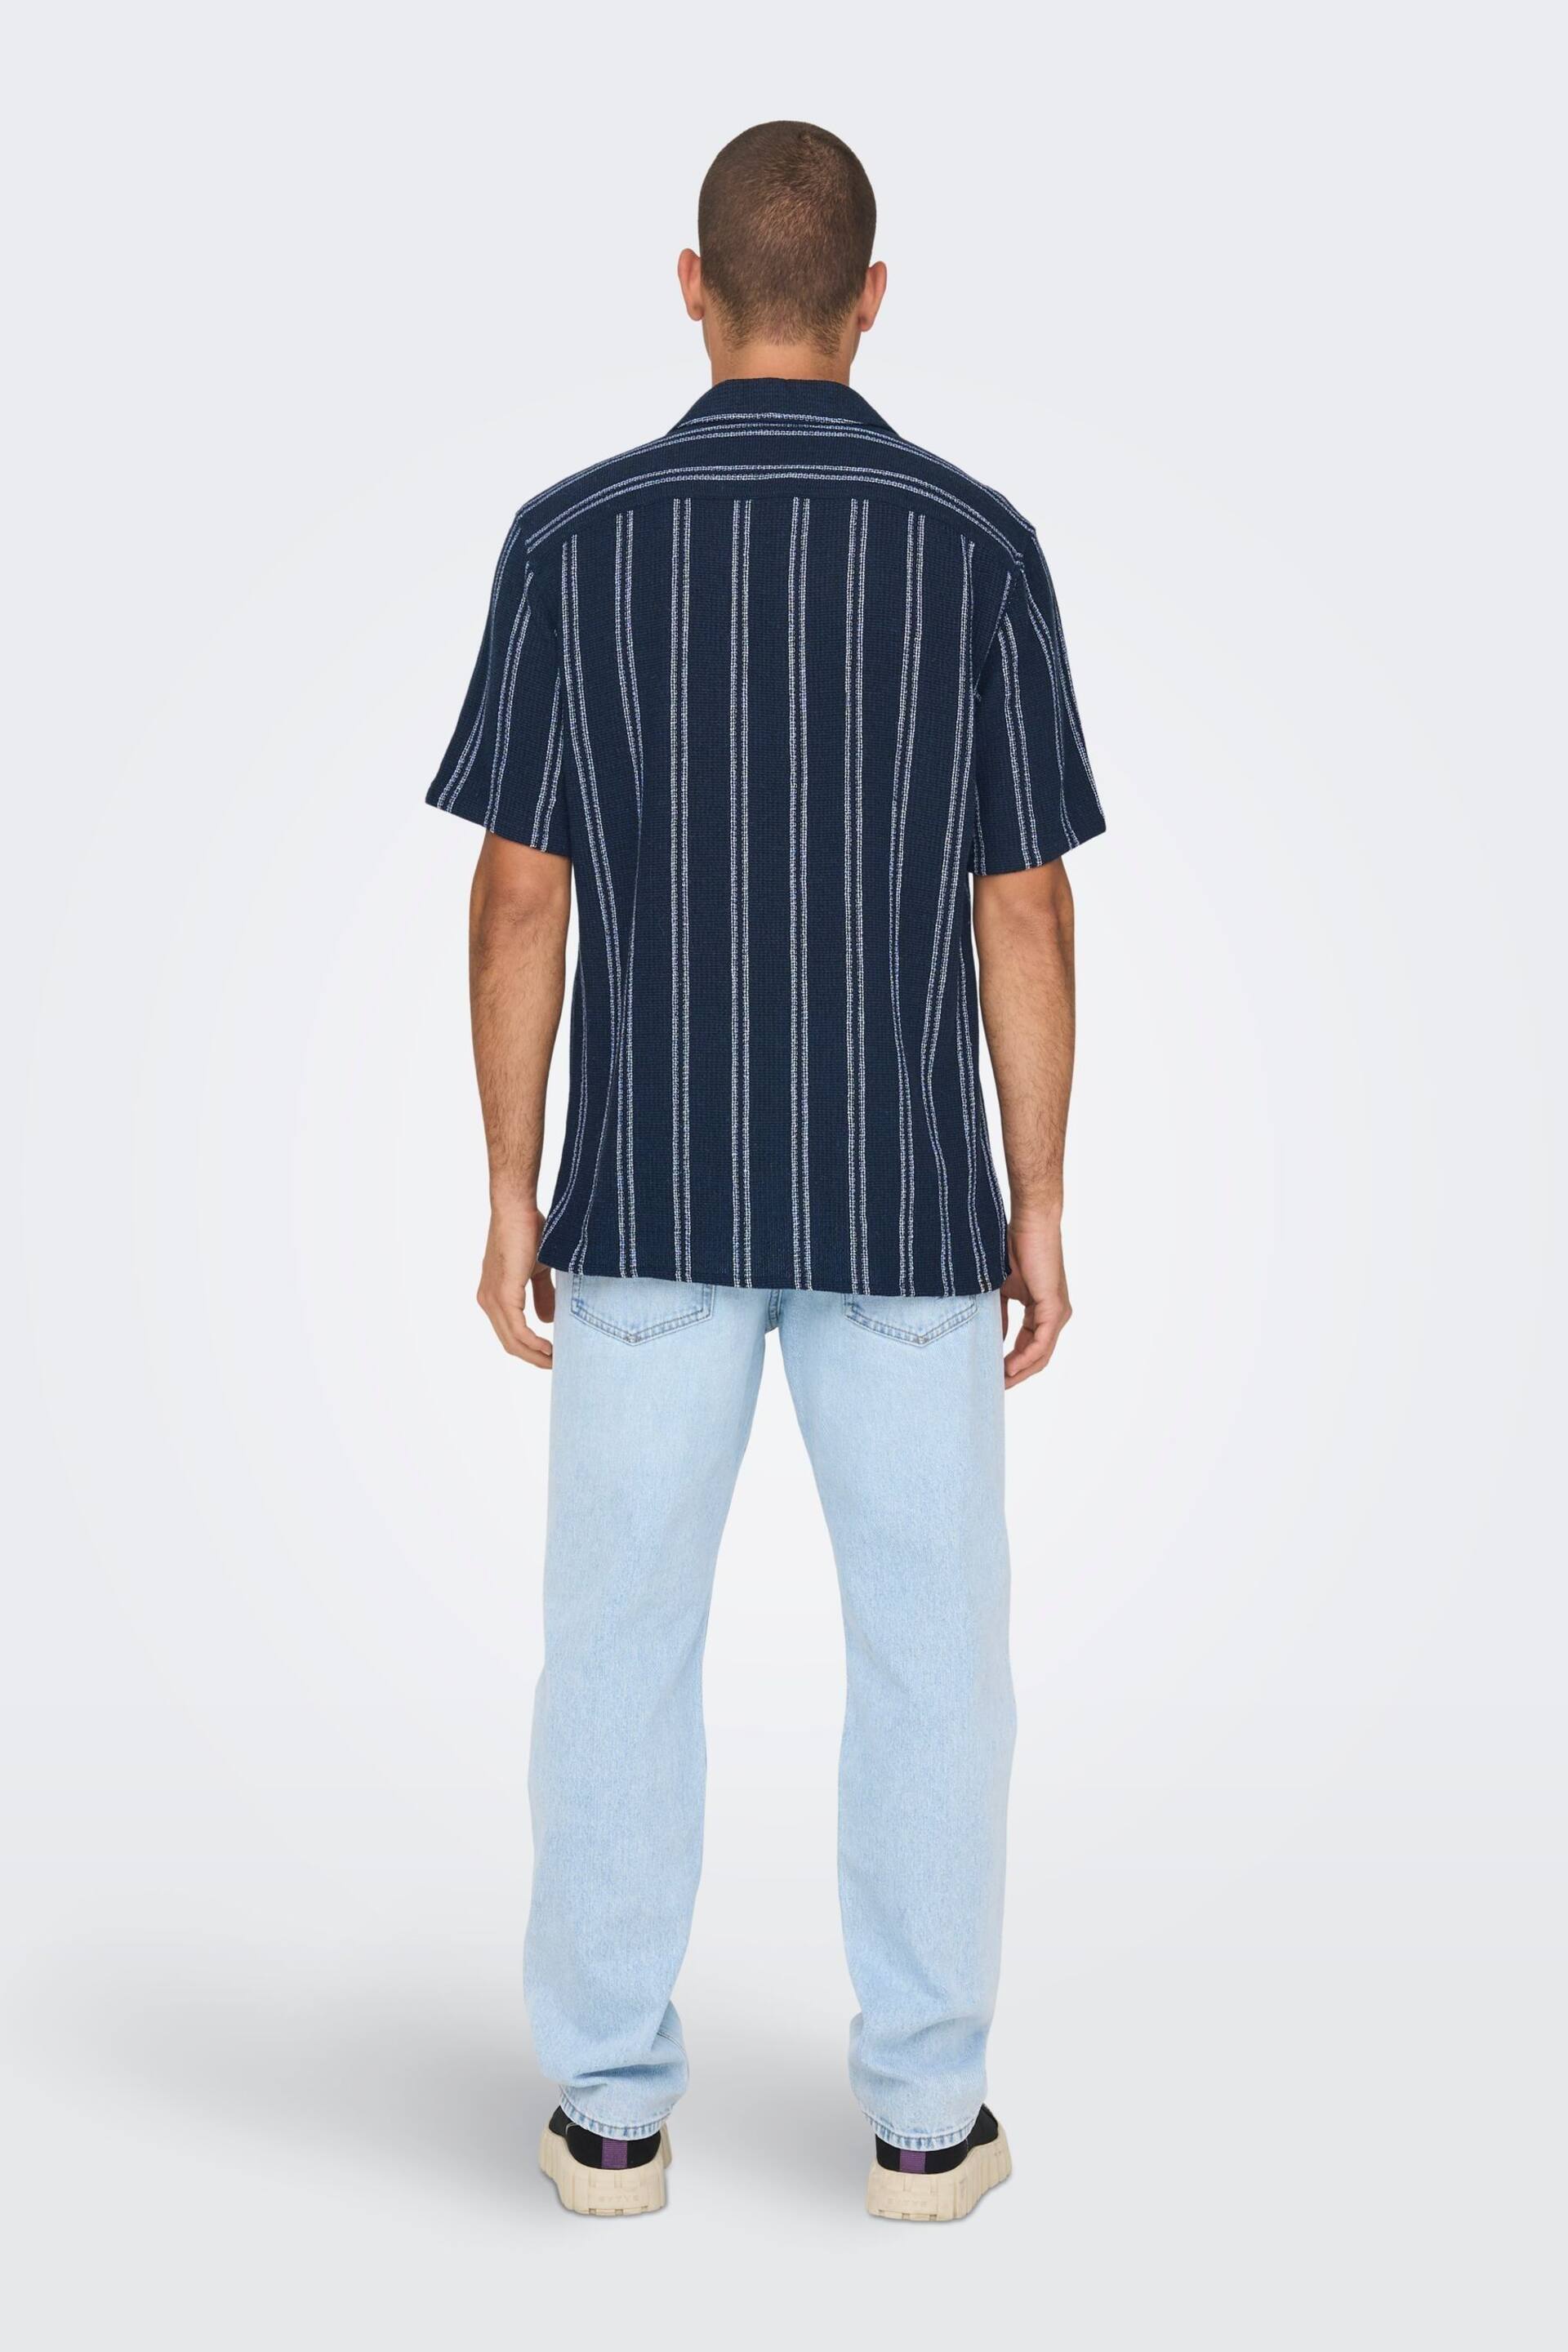 Only & Sons Navy Blue and White Woven Textured Short Sleeve Shirt - Image 3 of 5